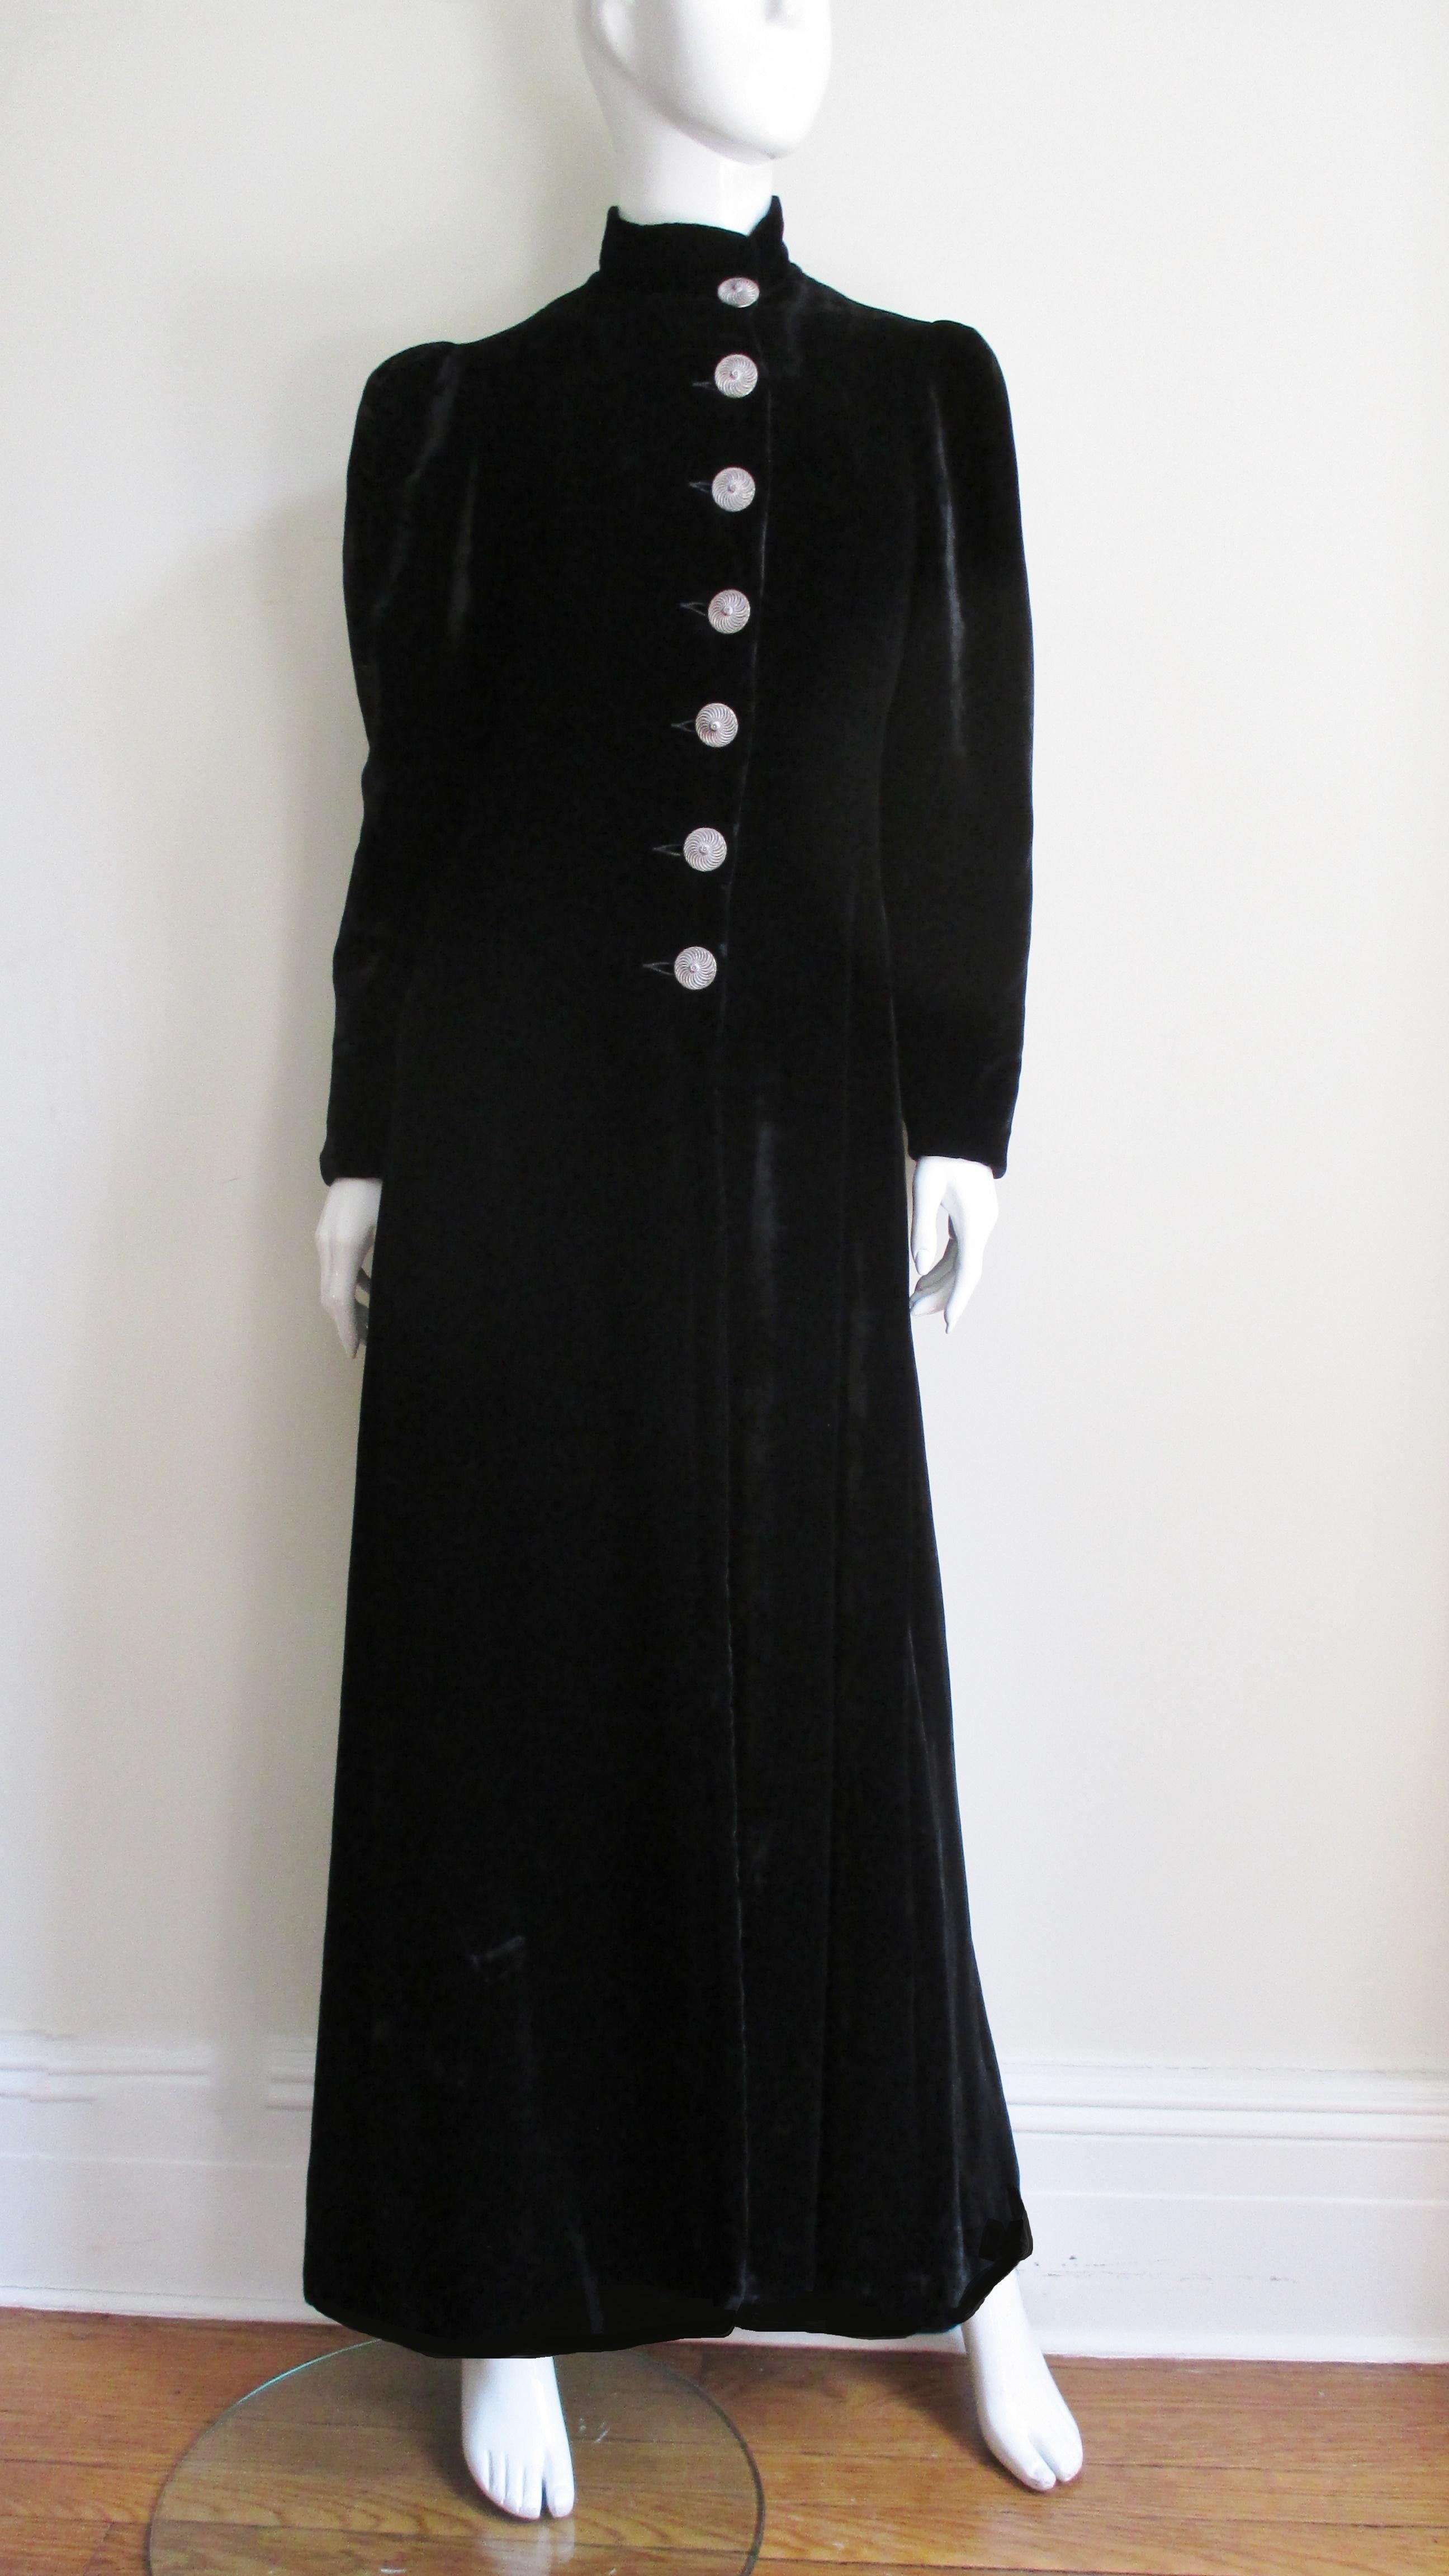 A gorgeous full length black silk velvet coat with the long elegant lines of the 1930s labelled 'Gladding's, Providence Since 1766'.  It has long sleeves darted a the shoulders to add fullness, a stand up collar and 7 beautiful, large silver